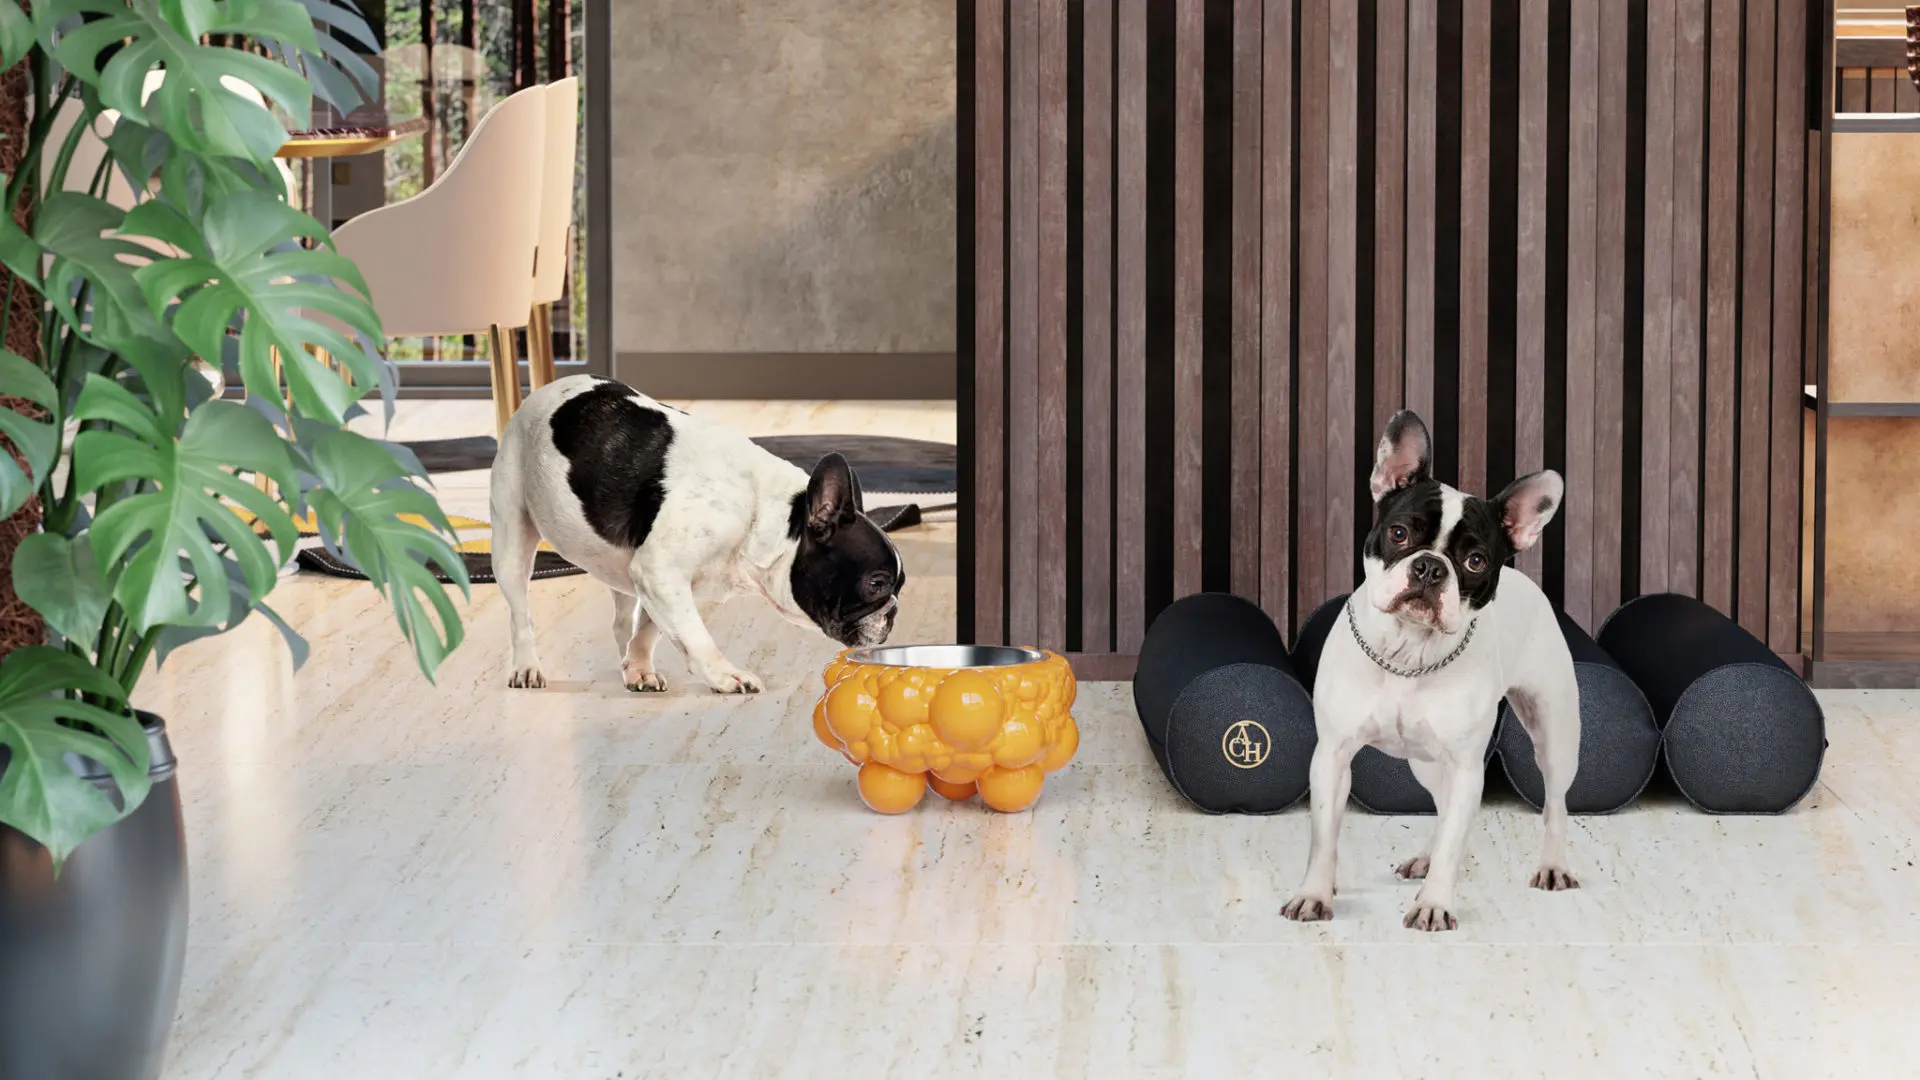 Luxury Dog Accessories for Stylish Pets